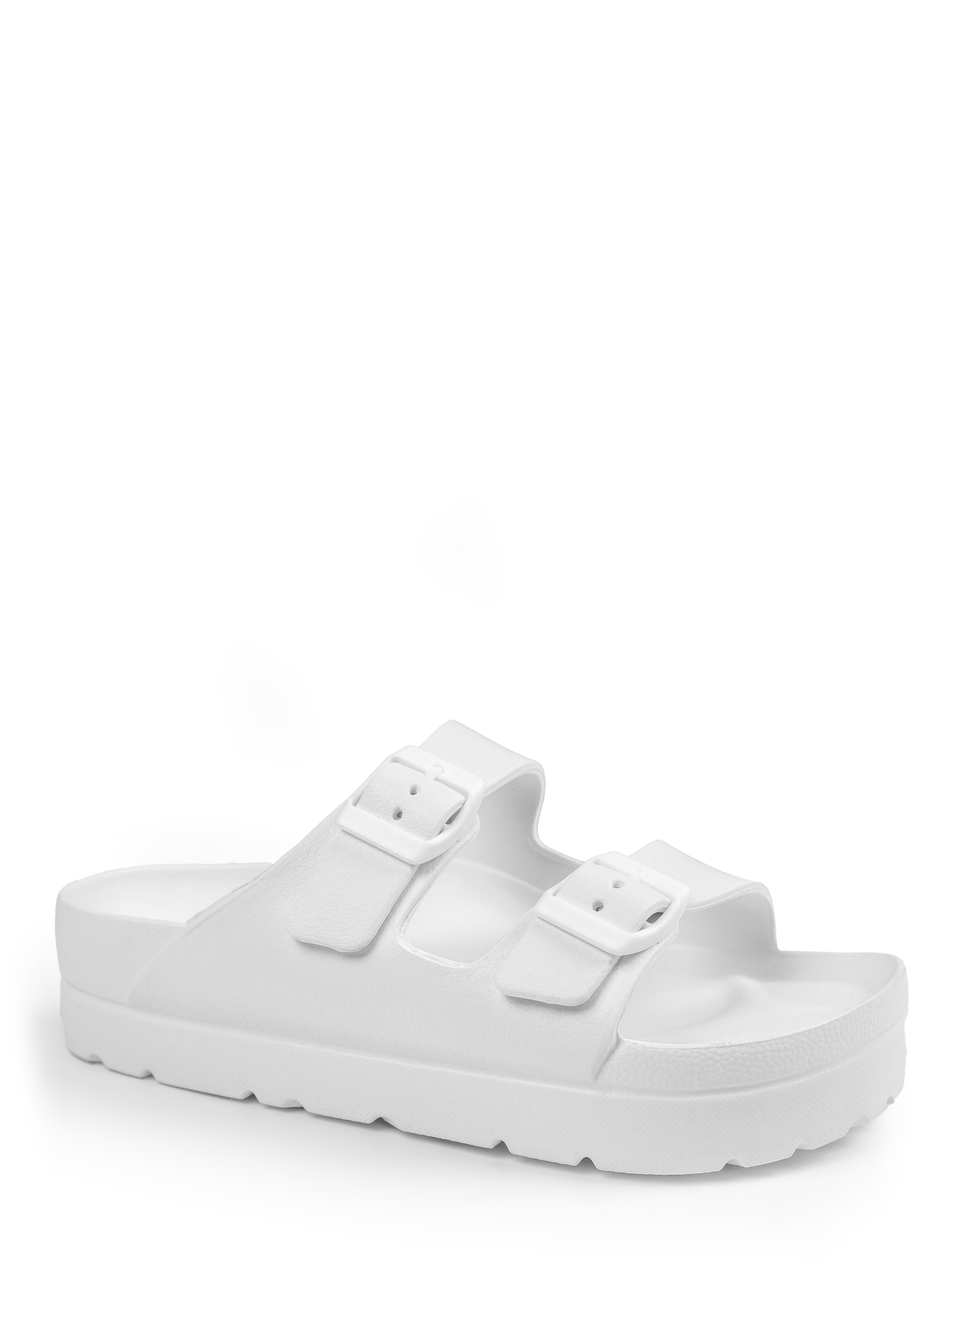 Where's That From White Danielle Slider Sandals With Buckle